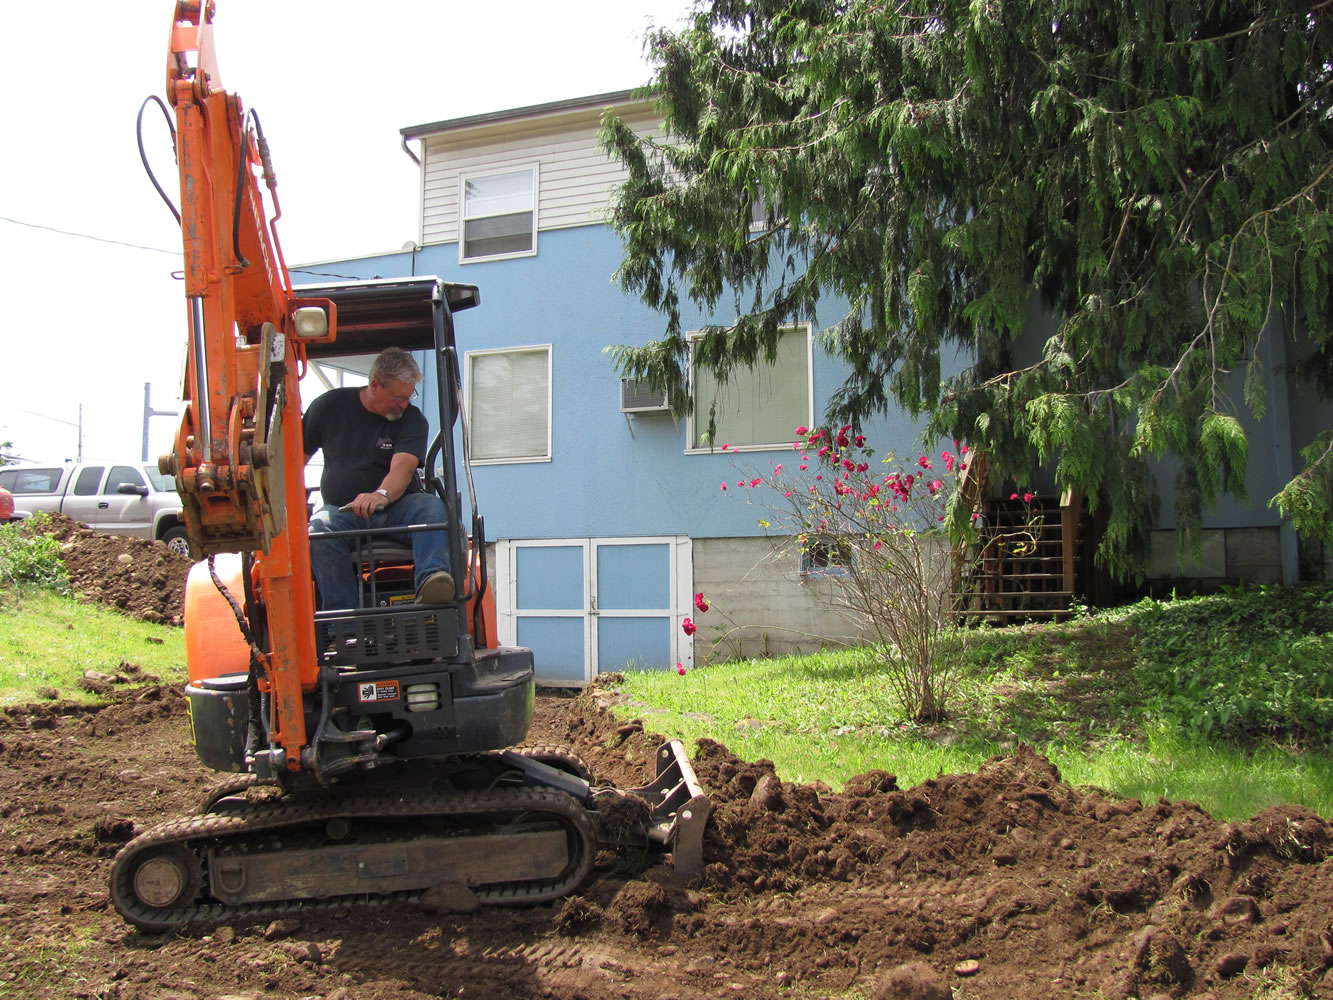 Myron Colvin is among the Camas Moose Lodge 1042 members volunteering to prepare the former Showboat Pub &amp; Grill site for the lodge to relocate in mid-July.